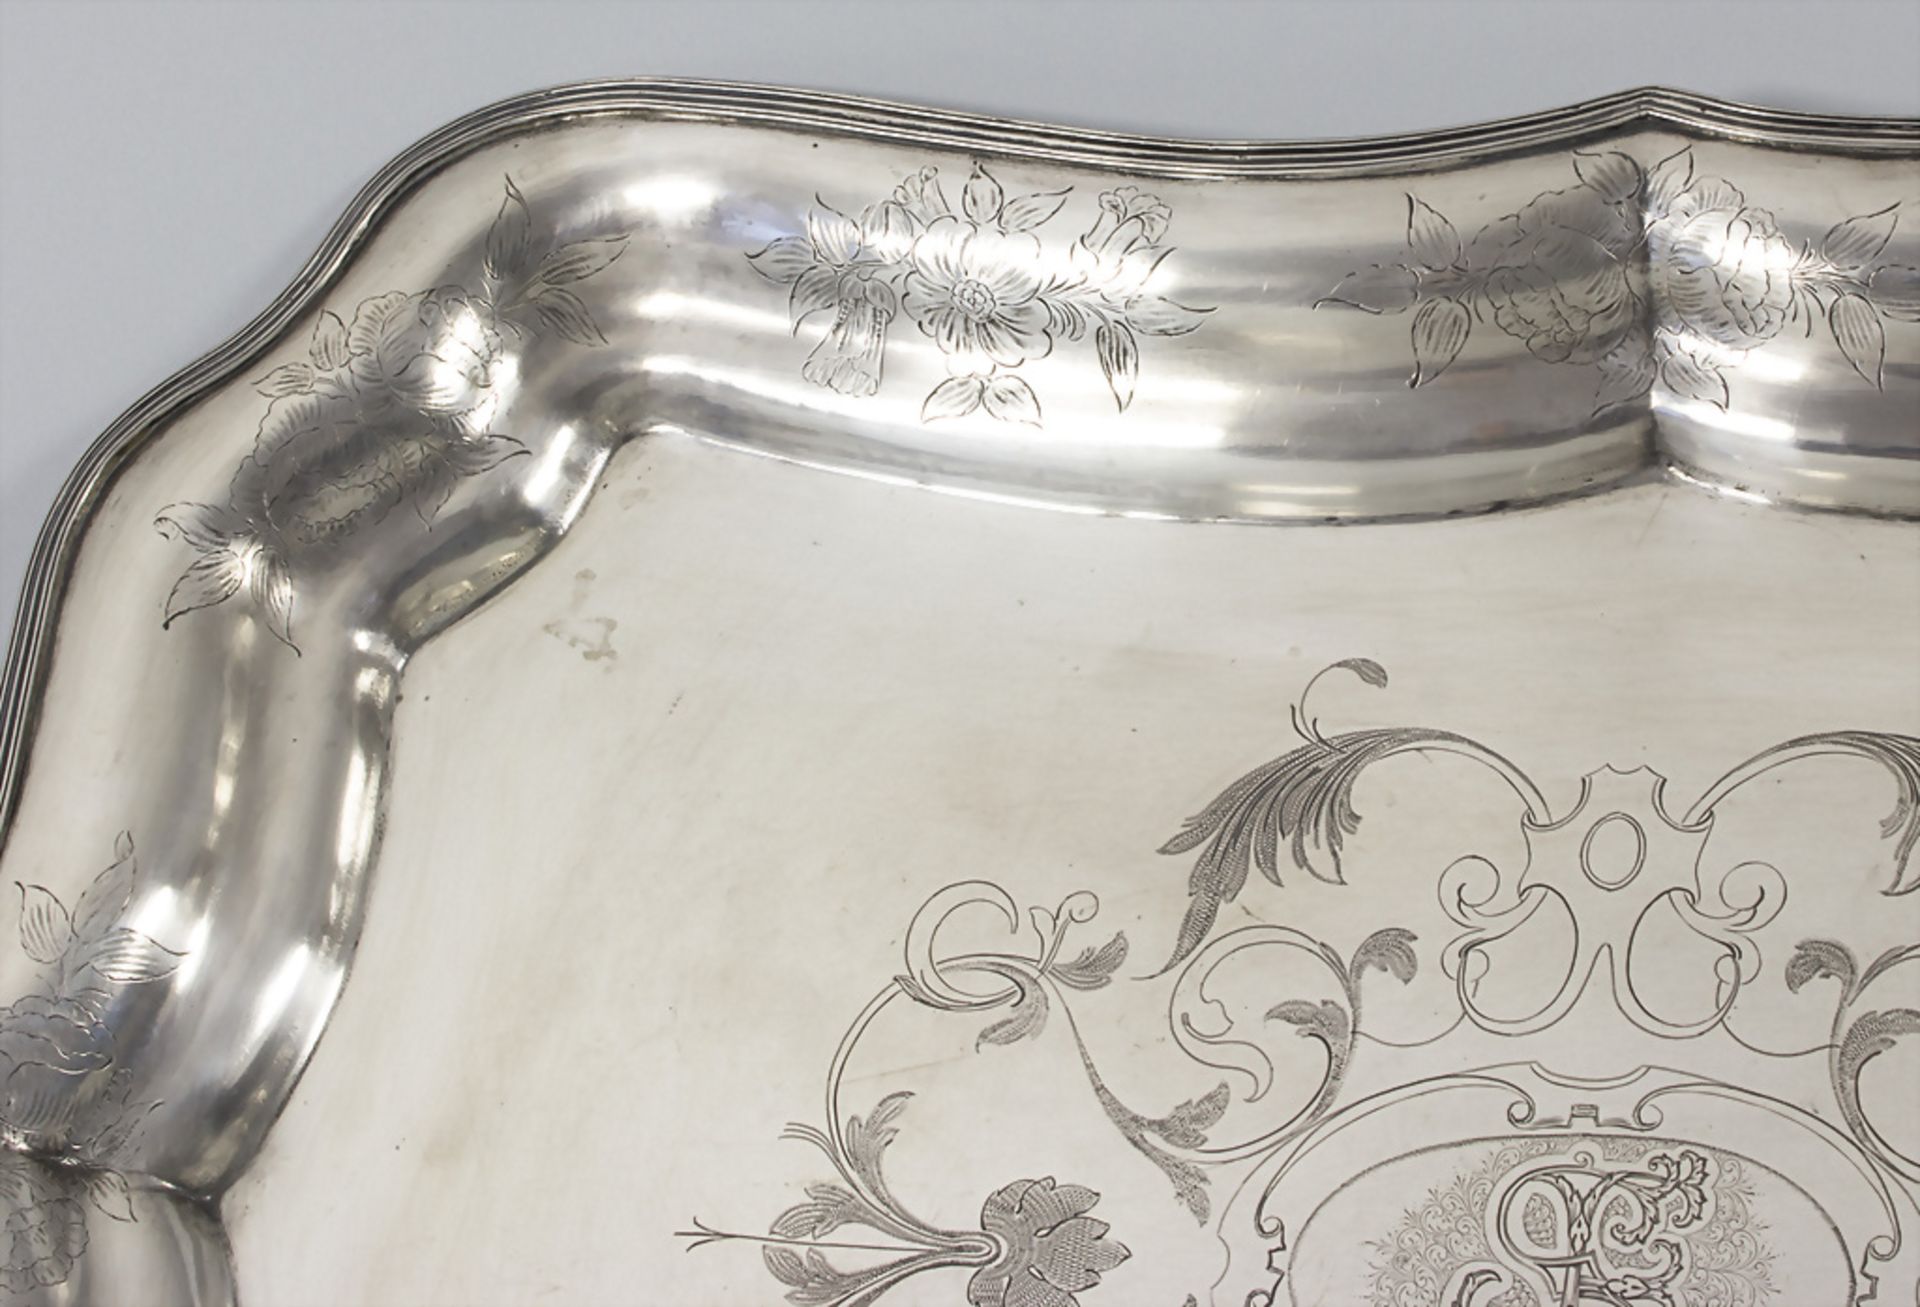 Prunk-Tablett / A large silver tray, Galtes, Barcelona, 19. Jh. - Image 3 of 9